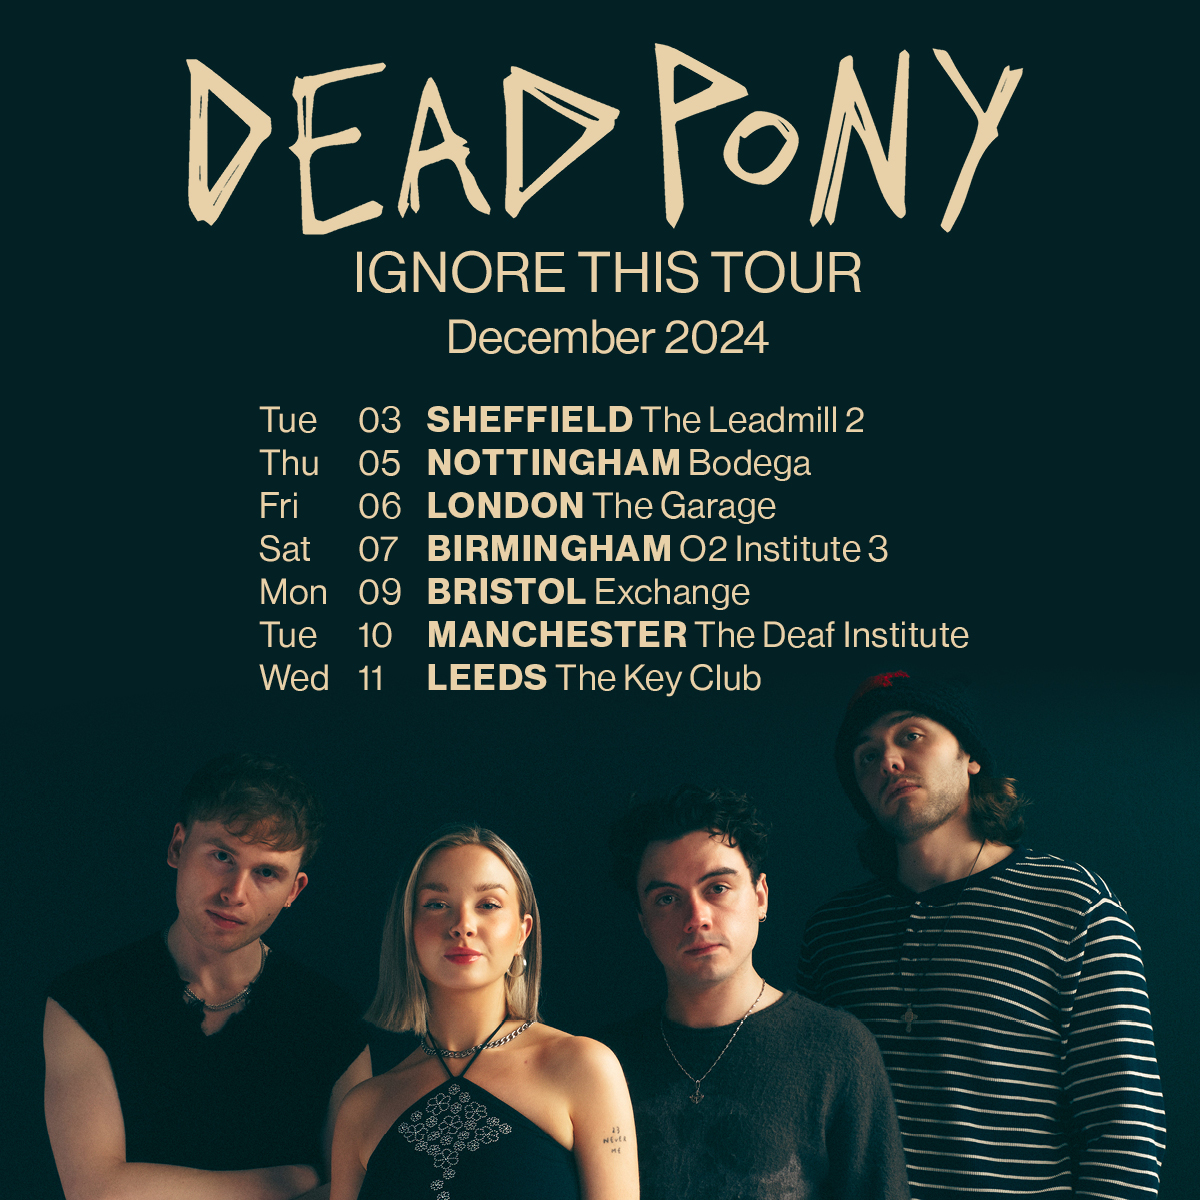 💚 NEW SHOW 💚 Rising Scottish stars @DeadPonyBand combine synth-rock with old school to create a fresh sound that's making waves on the scene. Catch them live in December! 📅 Friday 06 December 2024 🎟️ Tickets on sale Friday, 10am.